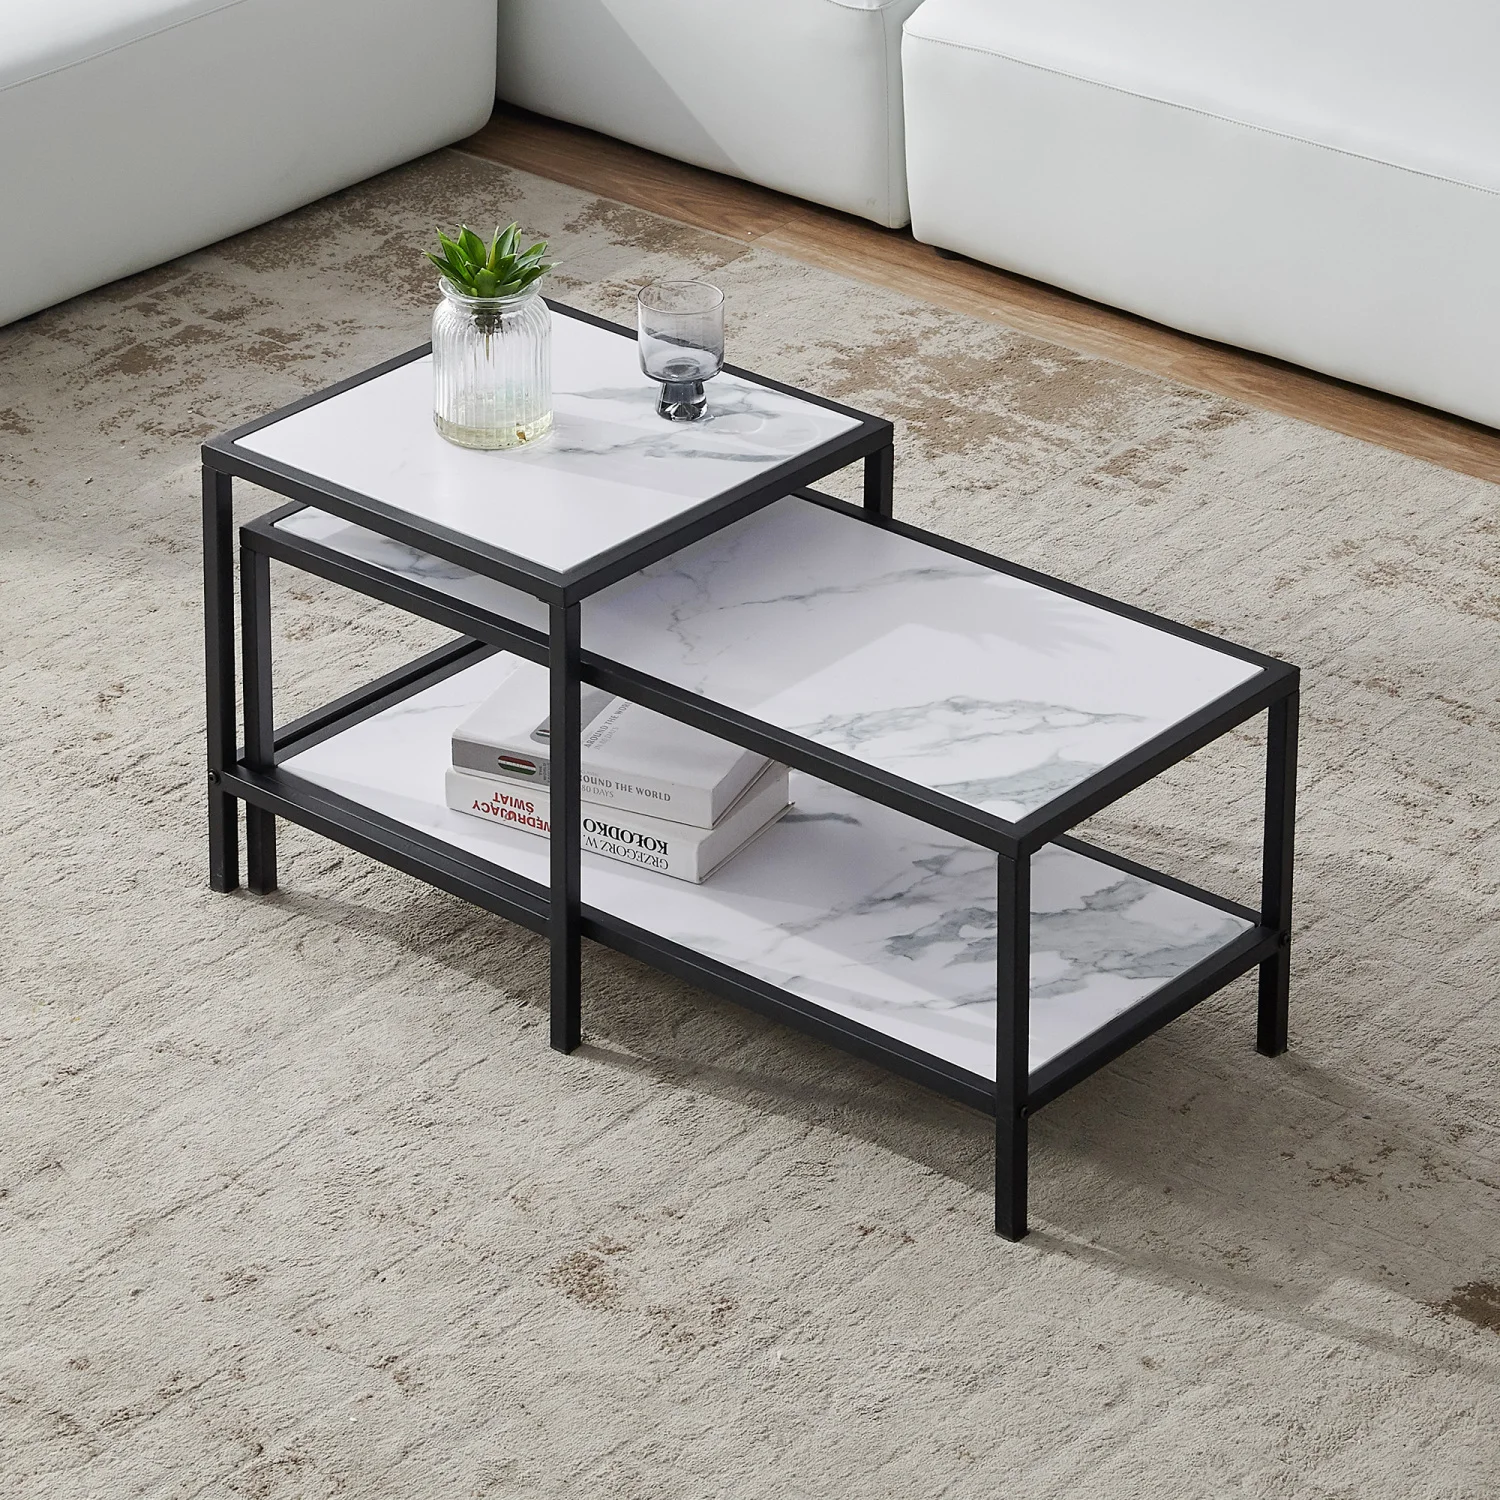 

Modern Black Metal Frame Wood Marble Color Square & Rectangle Nesting Coffee Table - Stylish and Functional Living Room Furnitur